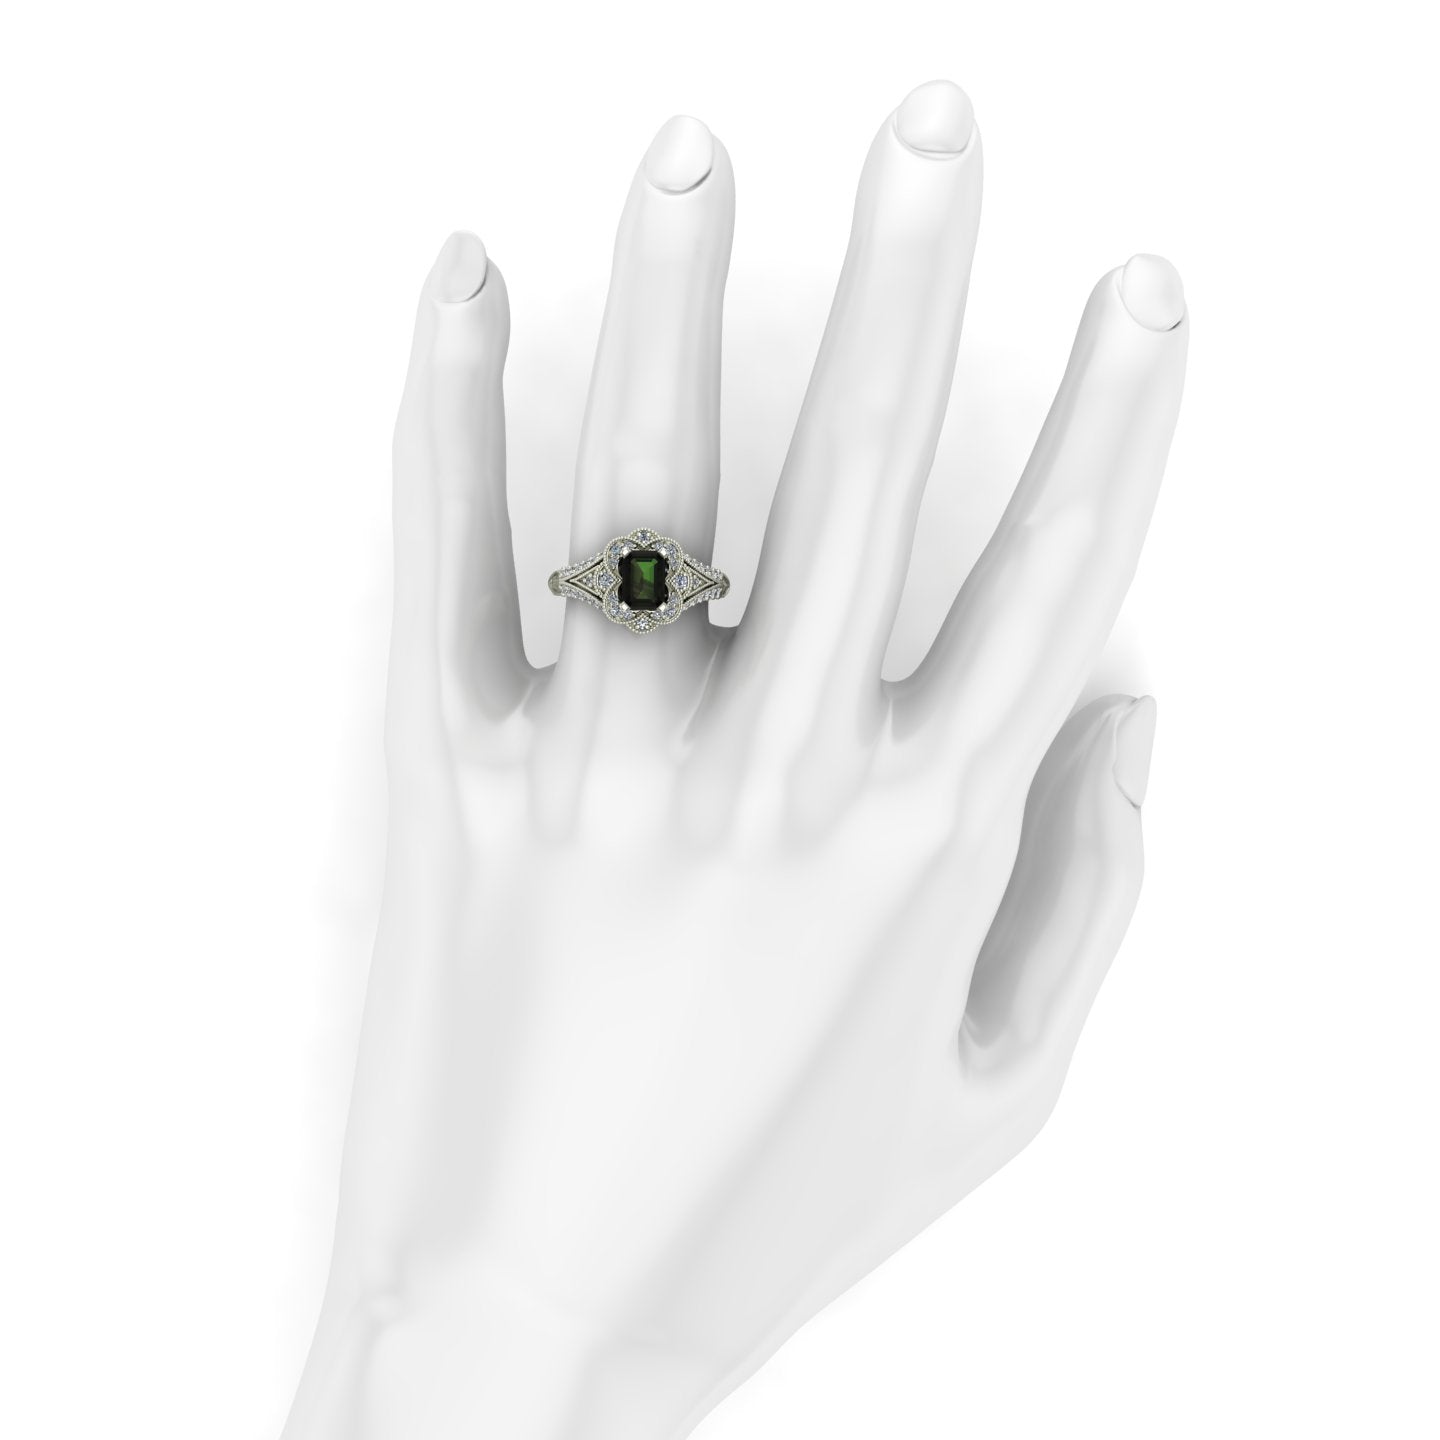 emerald cut green tourmaline and diamond scallop halo ring in 14k white gold - Charles Babb Designs - on hand